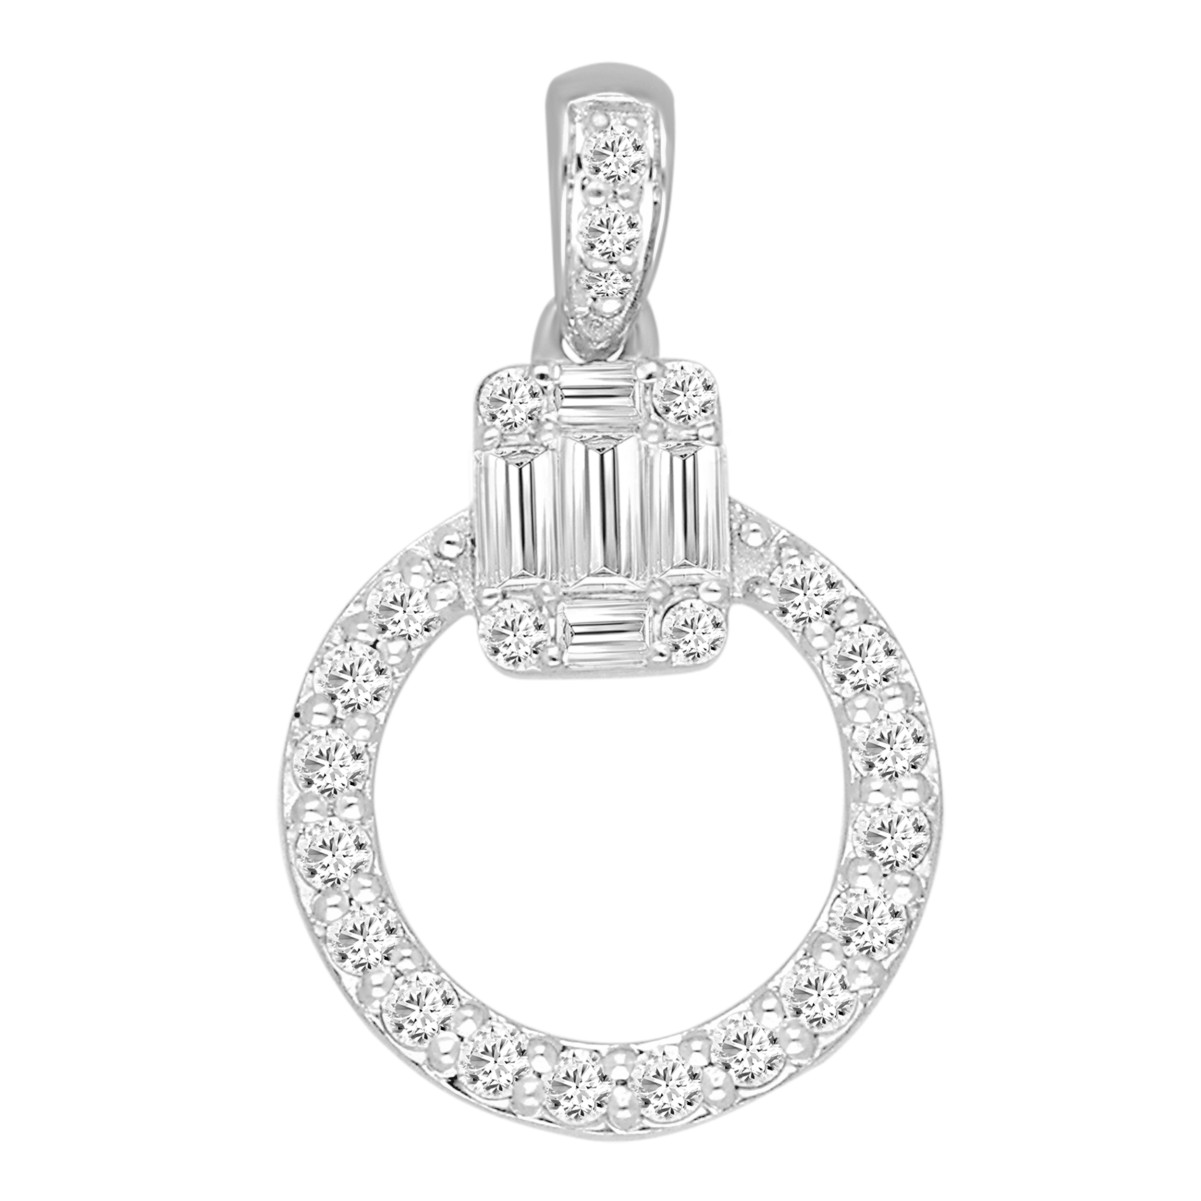 14K WHITE GOLD 1/3CT ROUND/BAGUETTE DIAMOND LADIES PENDANT WITH CHAIN 